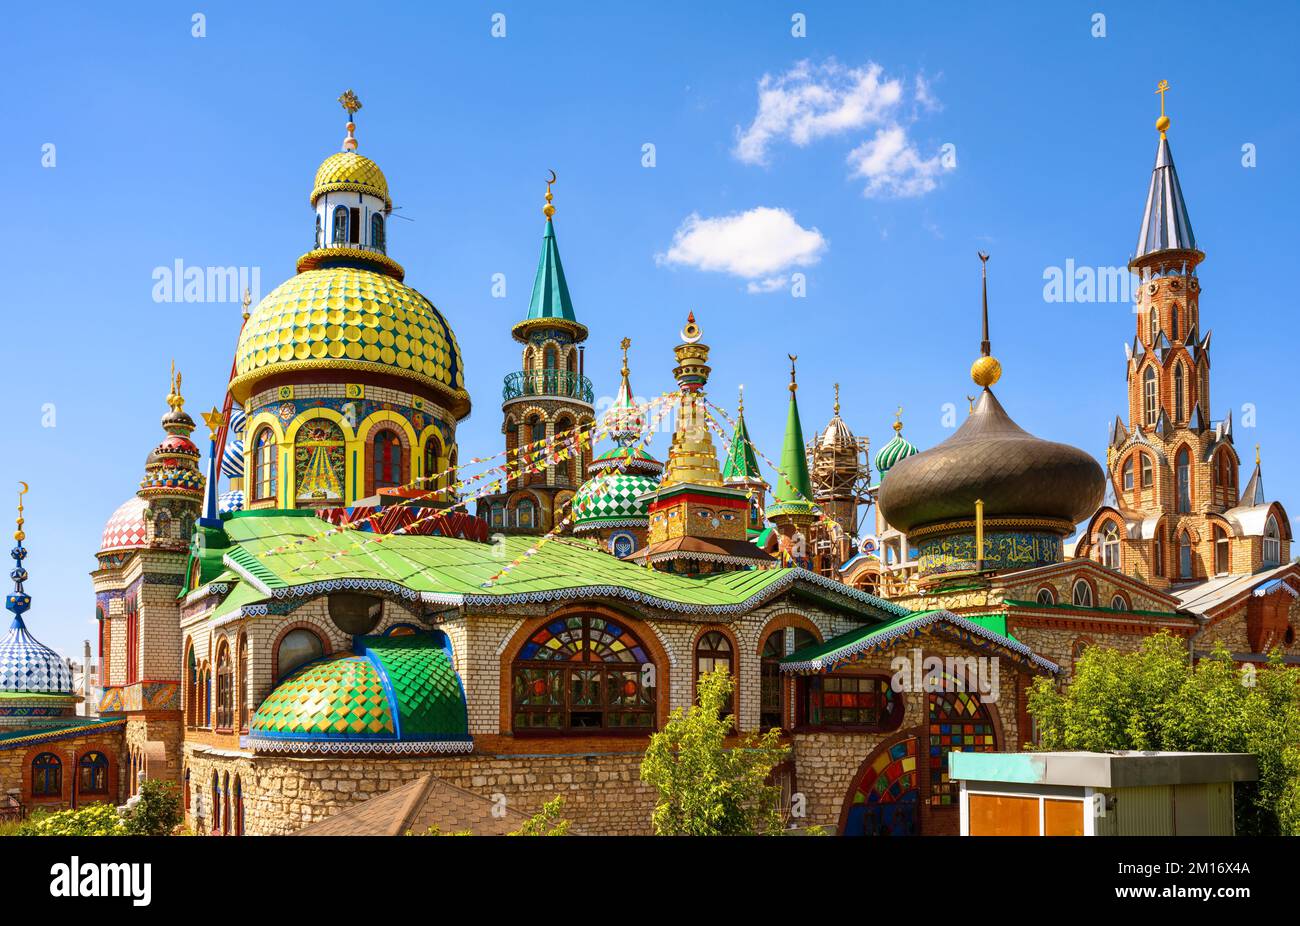 All Religions temple in Kazan, Tatarstan, Russia. It is landmark of Kazan. Panorama of beautiful colorful complex of churches, mosques and other place Stock Photo